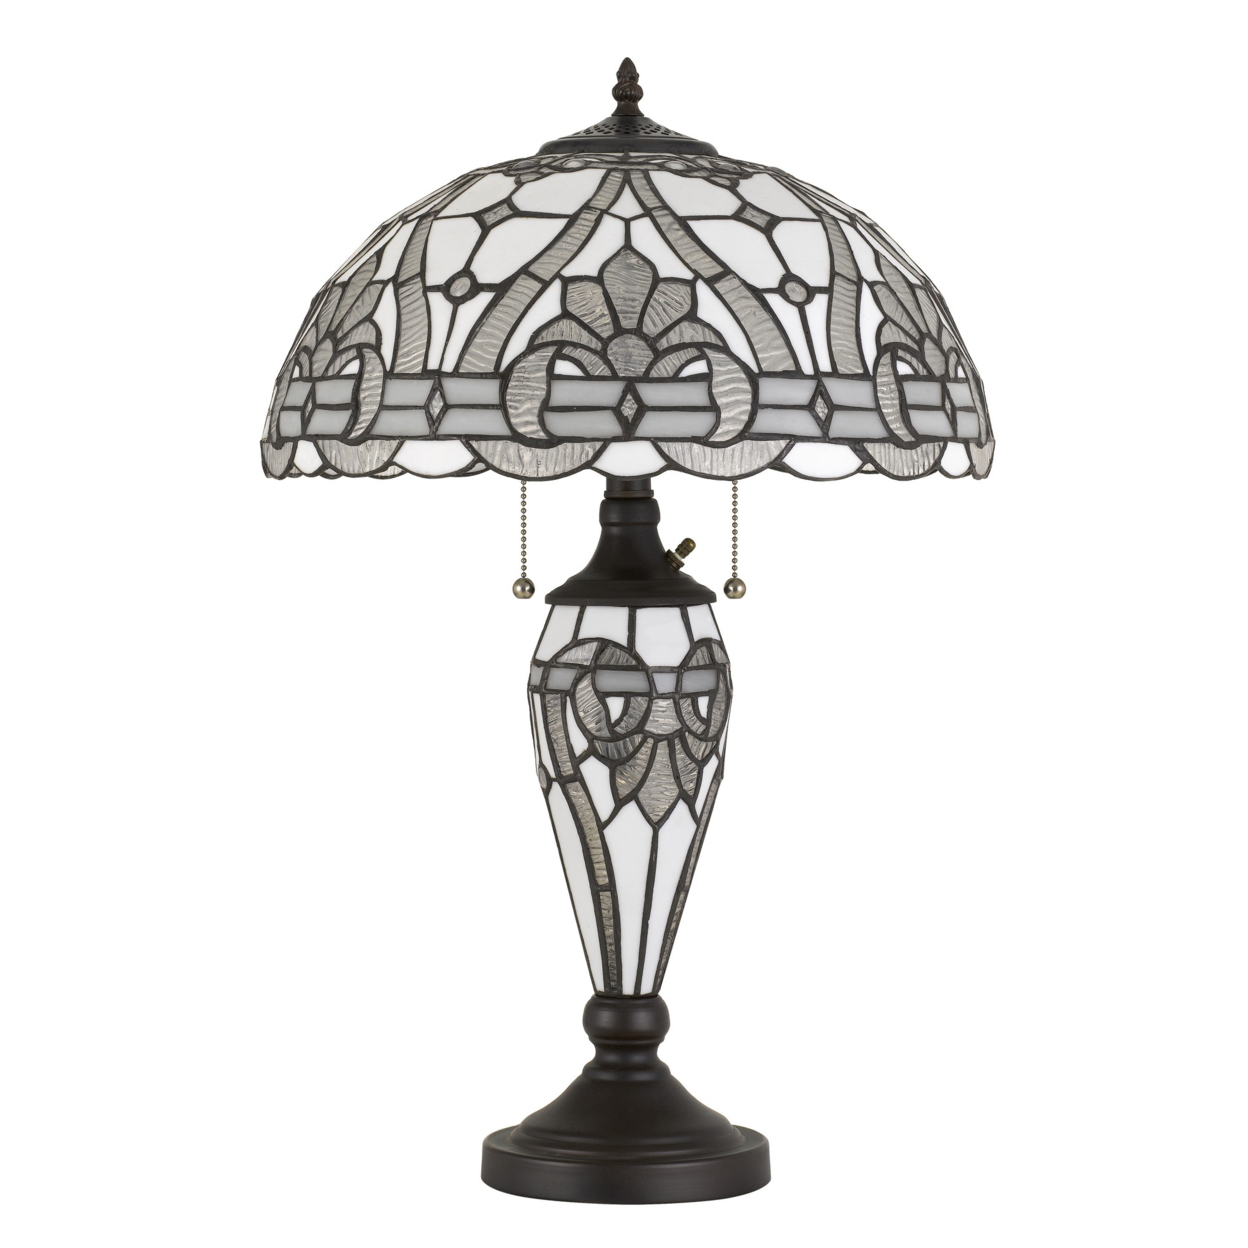 Glass Table Lamp With Umbrella Shade And Pull Chain Switch, Gray- Saltoro Sherpi